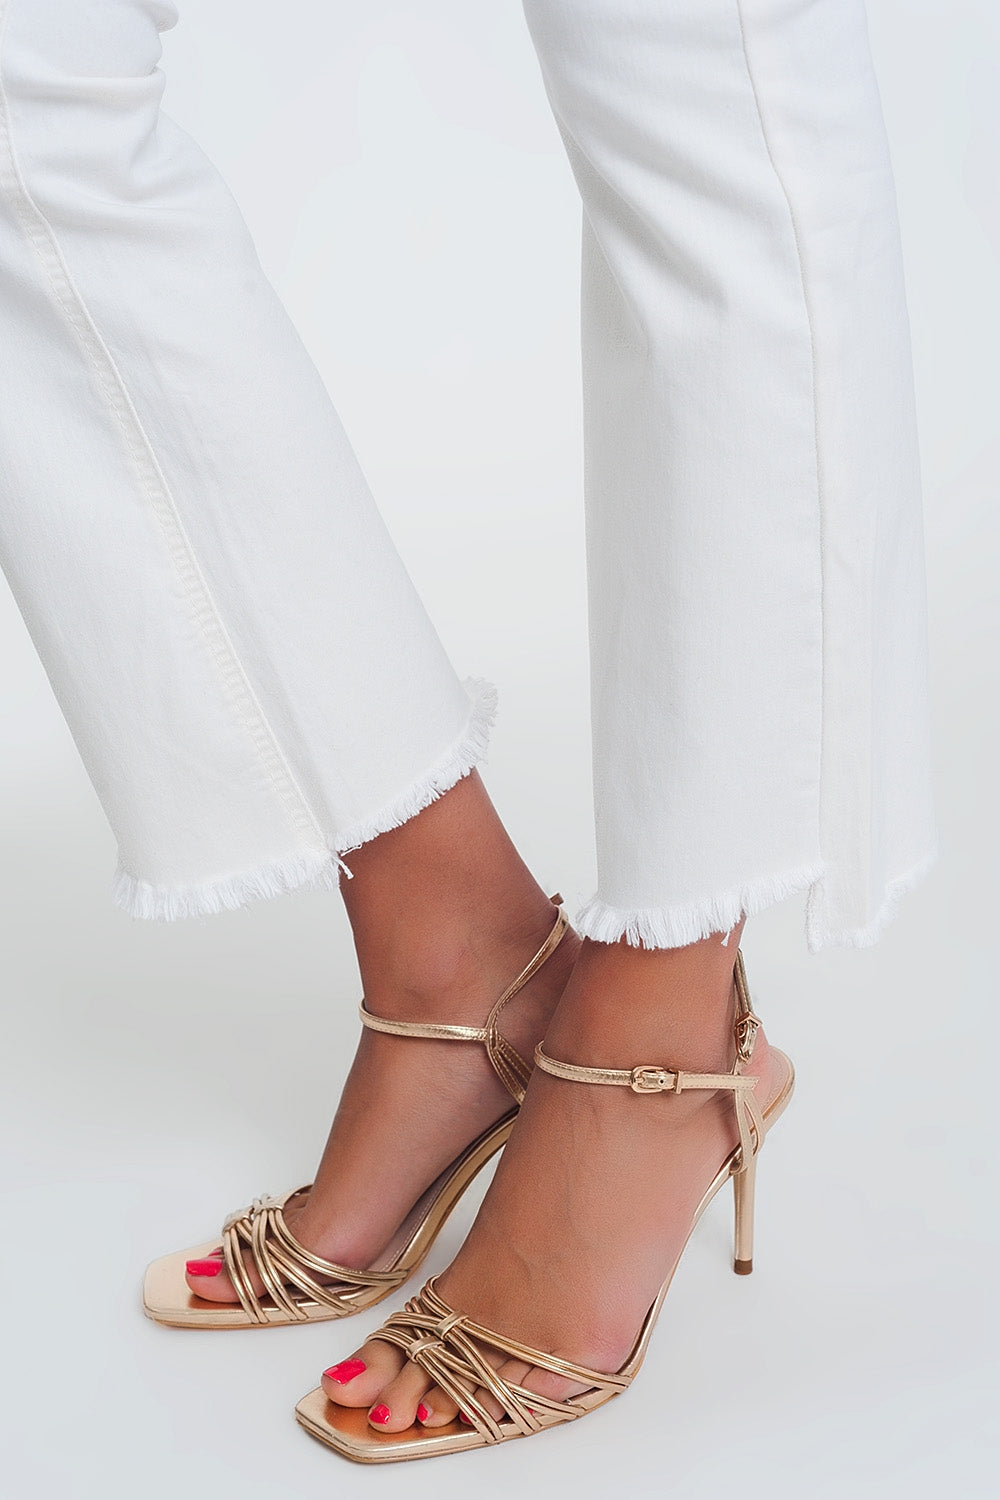 straight Pants in creme with wide ankles